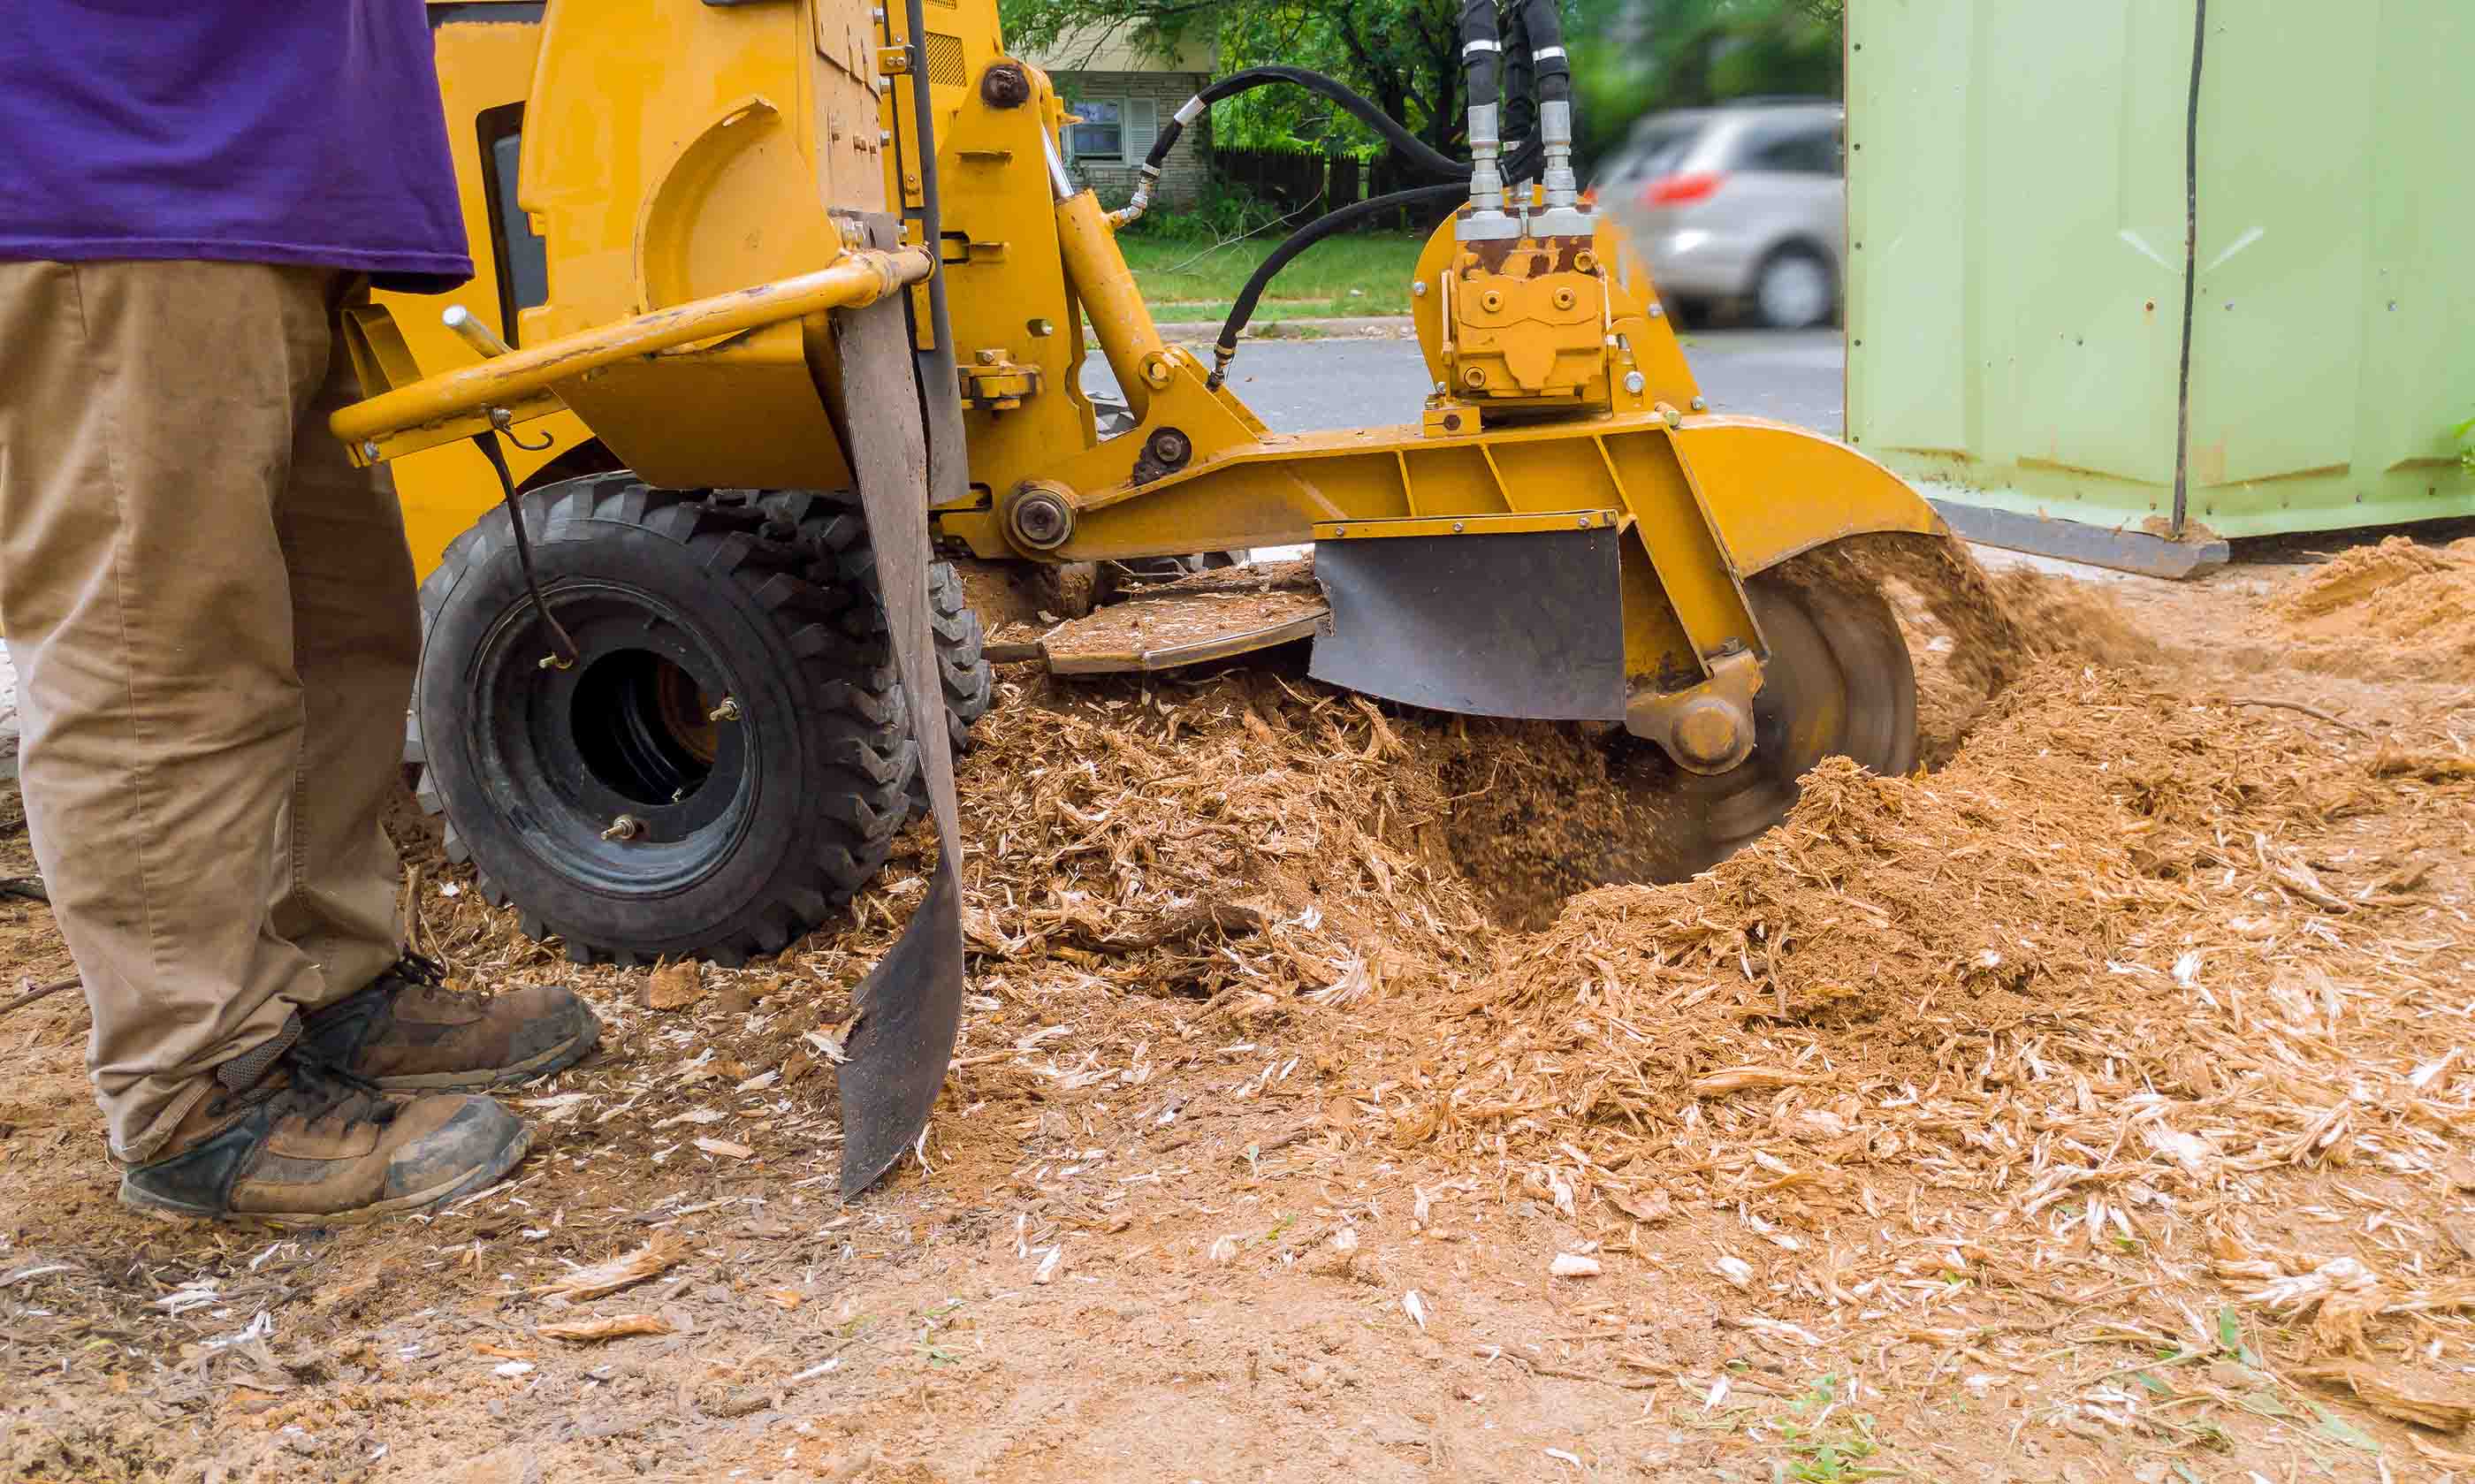 Stump Grinding-Port St. Lucie’s Best Tree Trimming and Tree Removal Services-We Offer Tree Trimming Services, Tree Removal, Tree Pruning, Tree Cutting, Residential and Commercial Tree Trimming Services, Storm Damage, Emergency Tree Removal, Land Clearing, Tree Companies, Tree Care Service, Stump Grinding, and we're the Best Tree Trimming Company Near You Guaranteed!